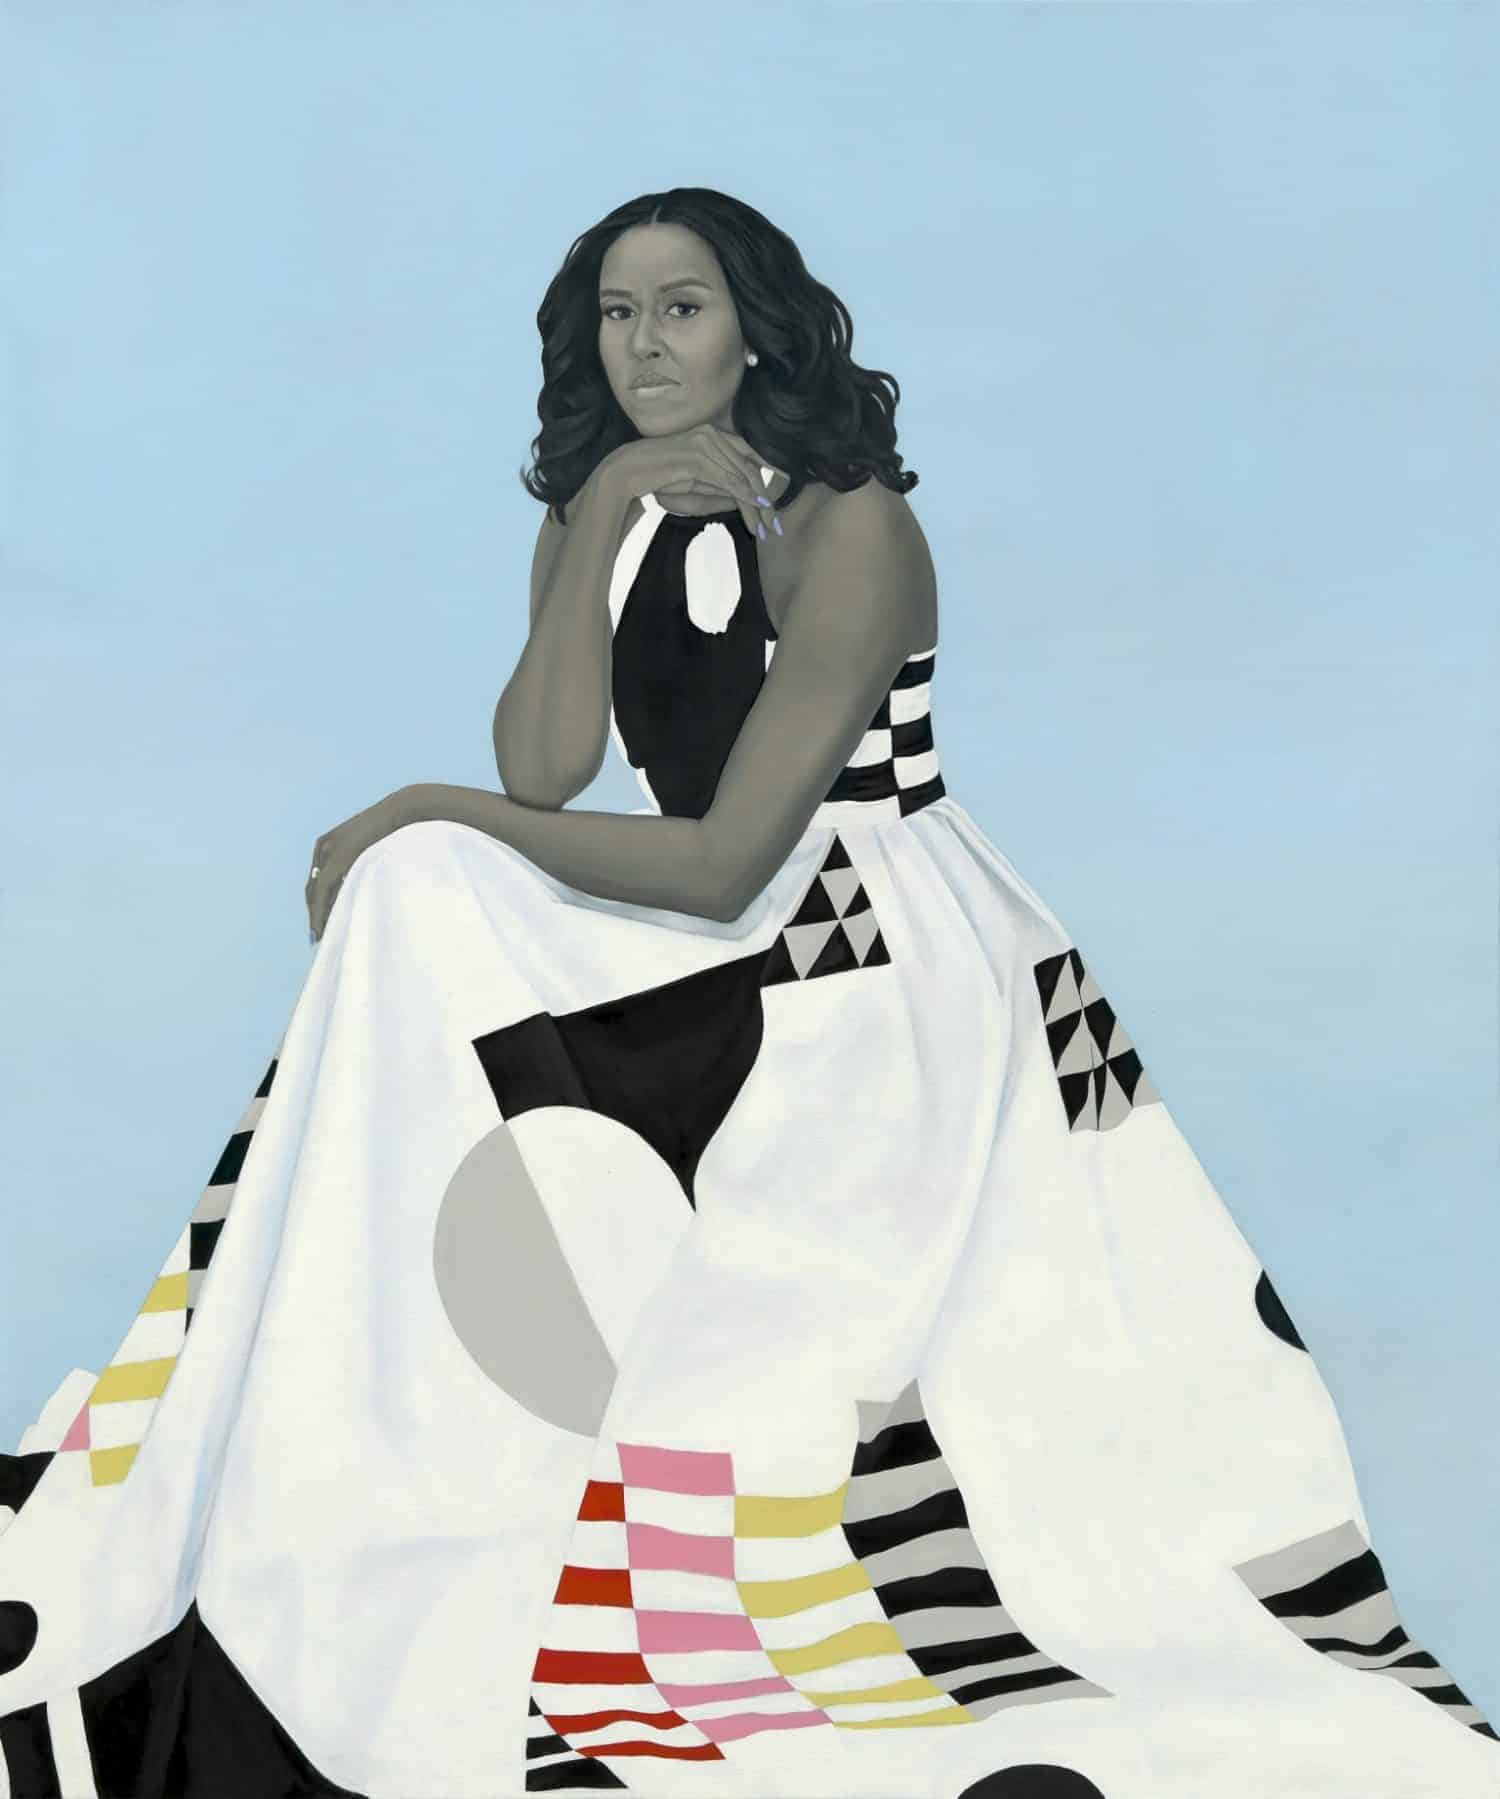 Michelle LaVaughn Robinson Obama by Amy Sherald, oil on linen, 2018. Courtesy National Portrait Gallery, Smithsonian Institution.